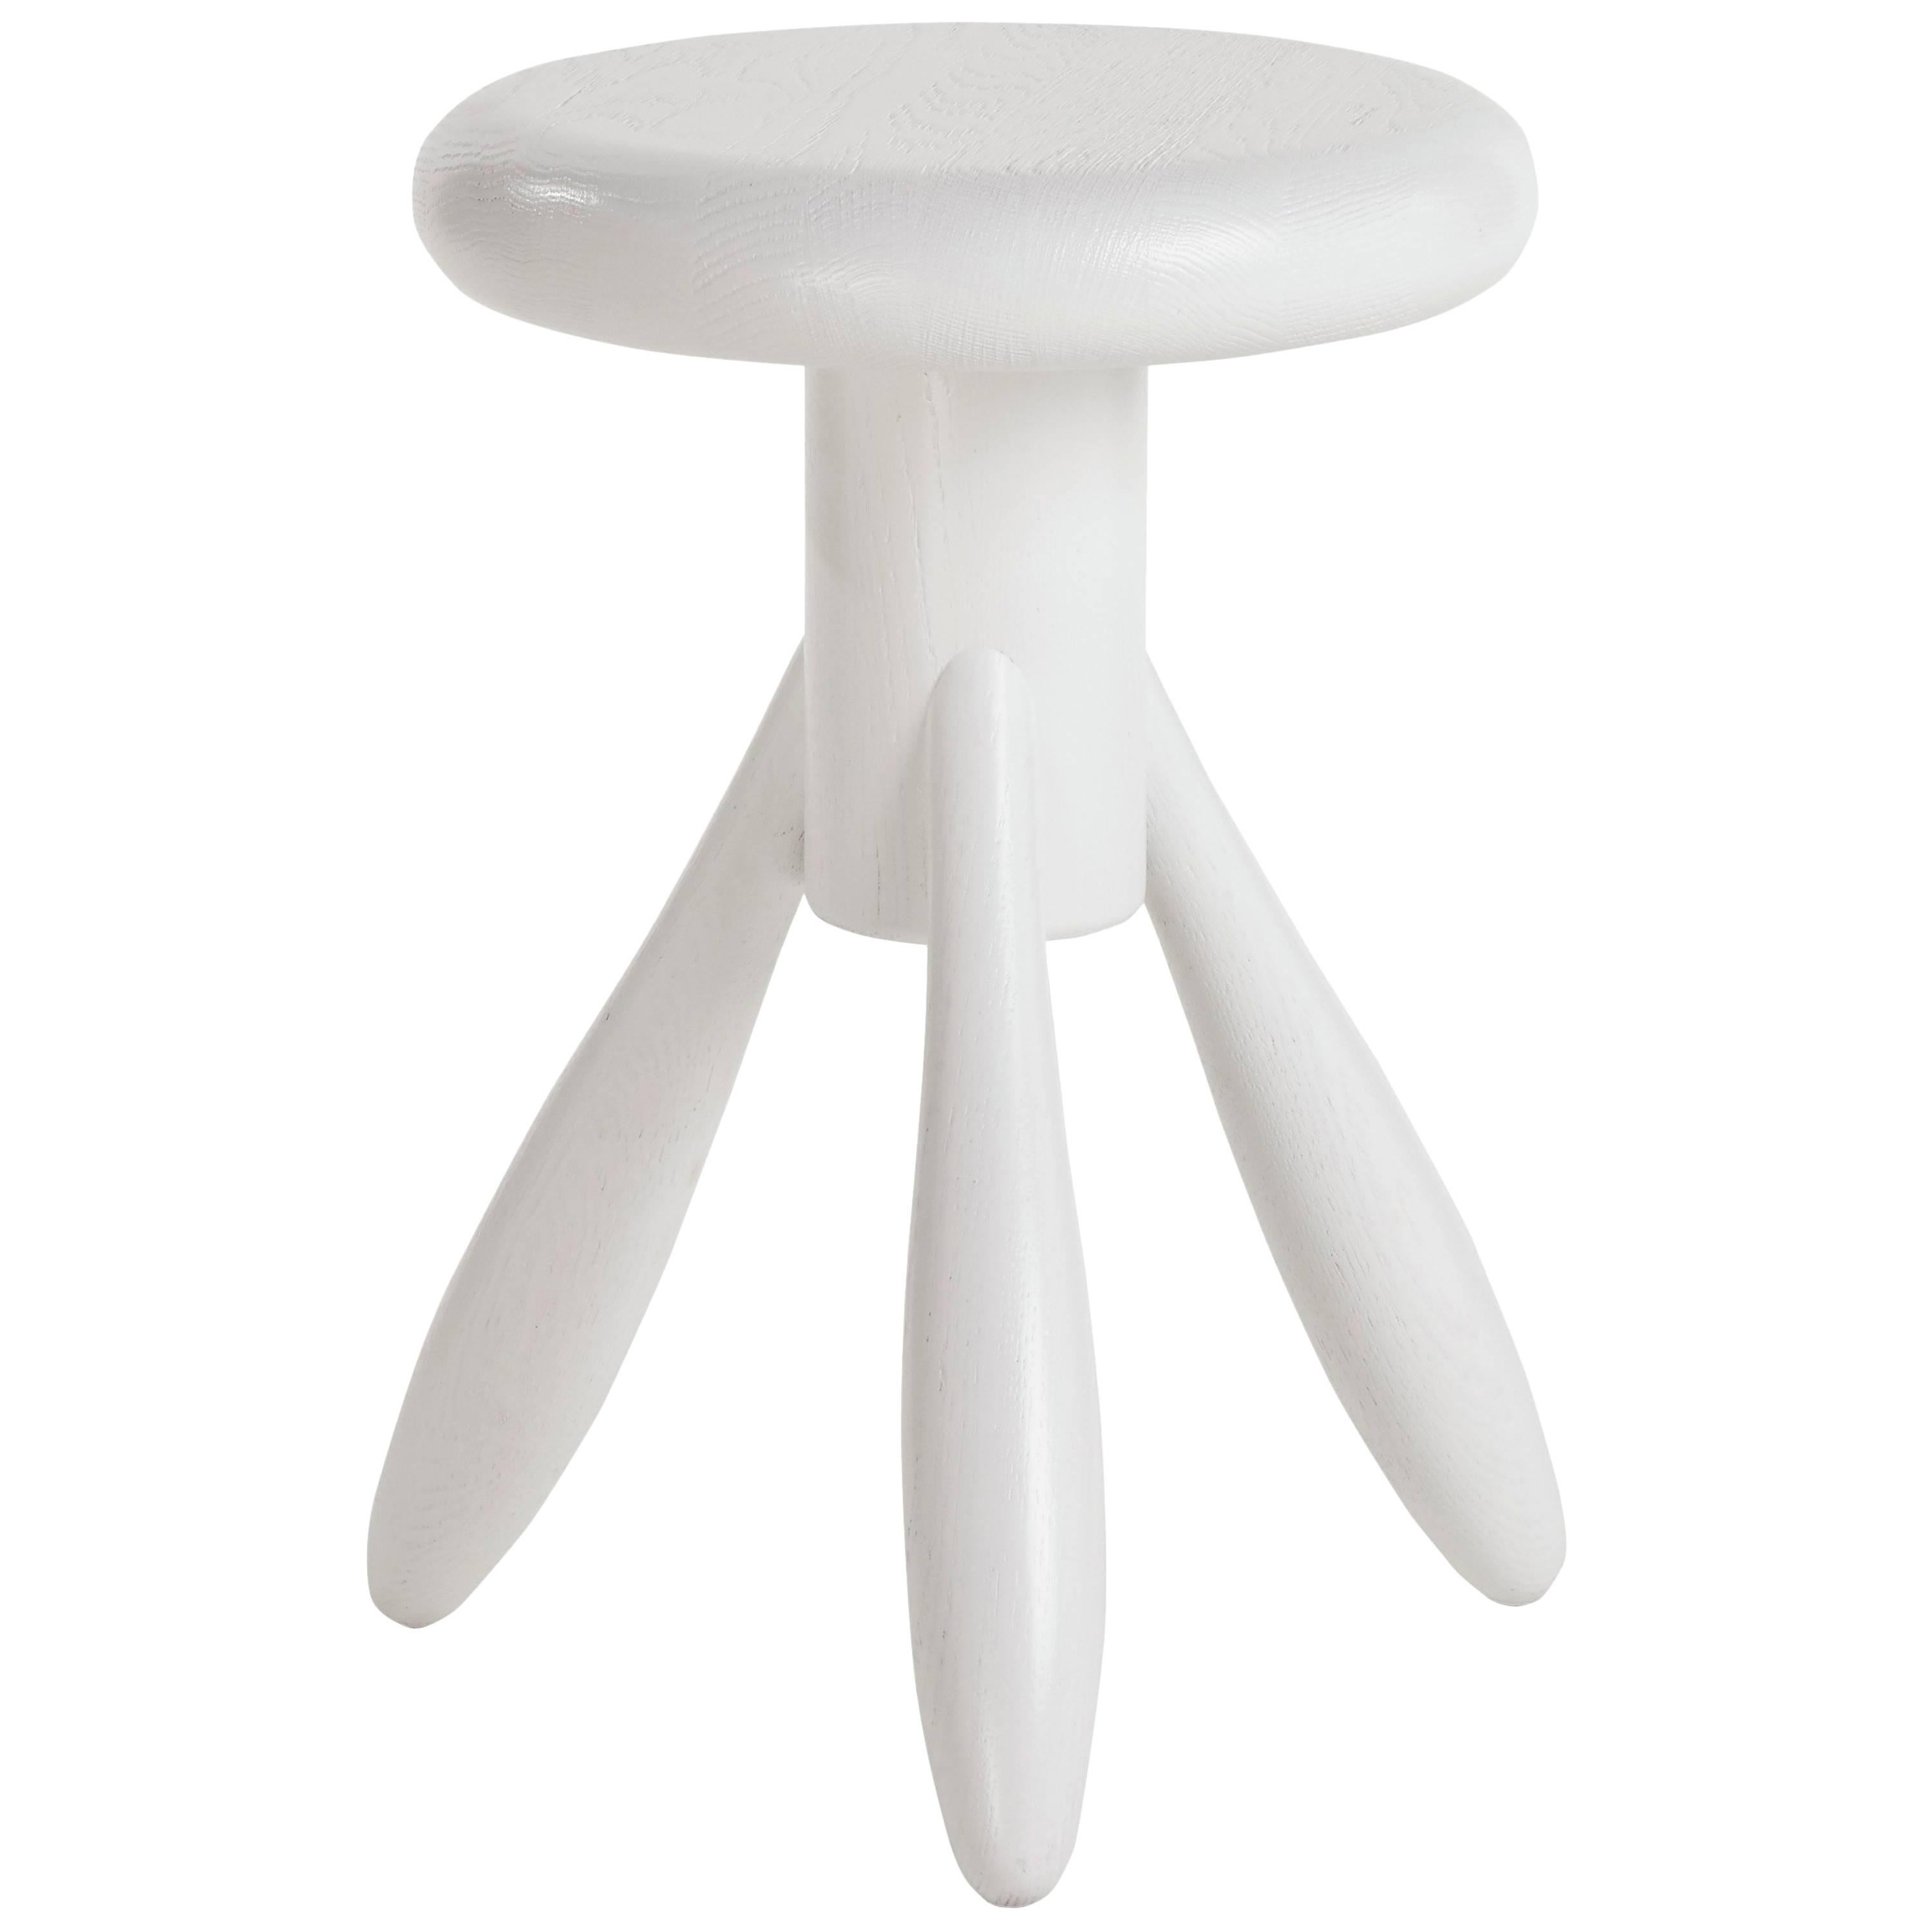 Authentic Baby Rocket Stool in Oak with White Lacquer by Eero Aarino & Artek For Sale